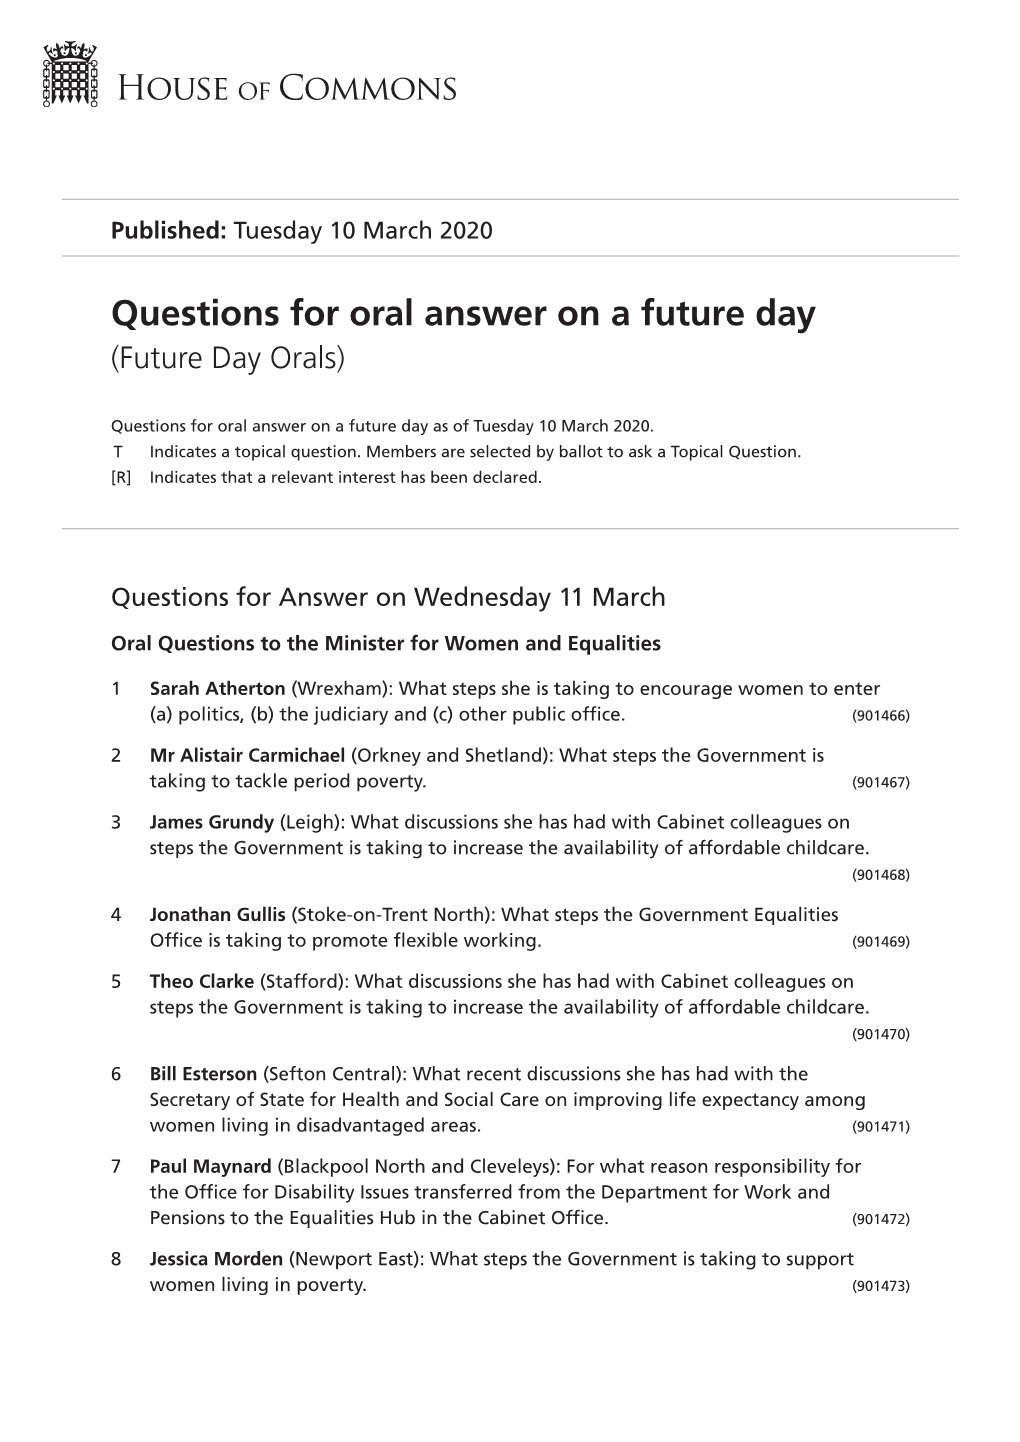 Future Oral Questions As of Tue 10 Mar 2020